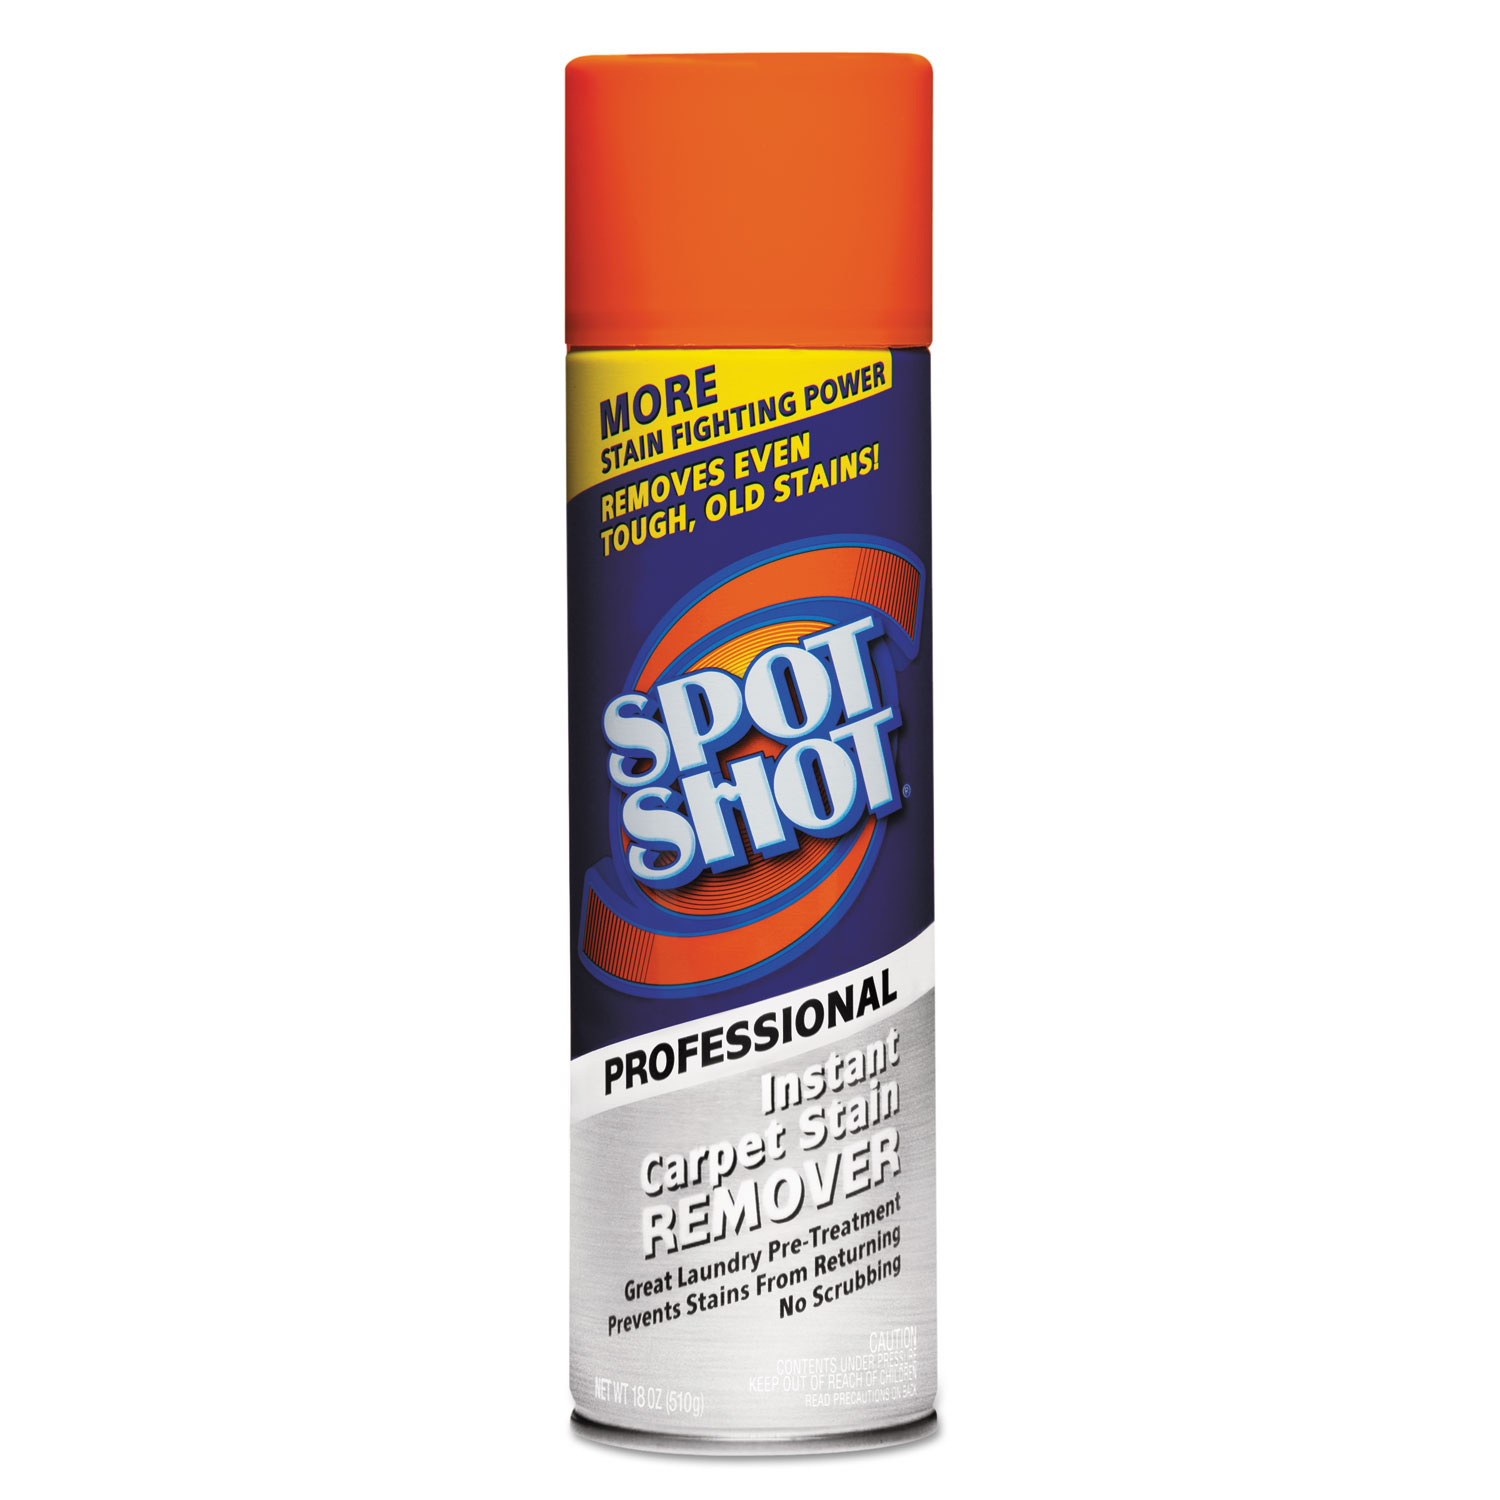  WD-40 WDC 009934 Spot Shot Professional Instant Carpet Stain Remover, 18oz Spray Can, 12/Carton (WDF009934) 